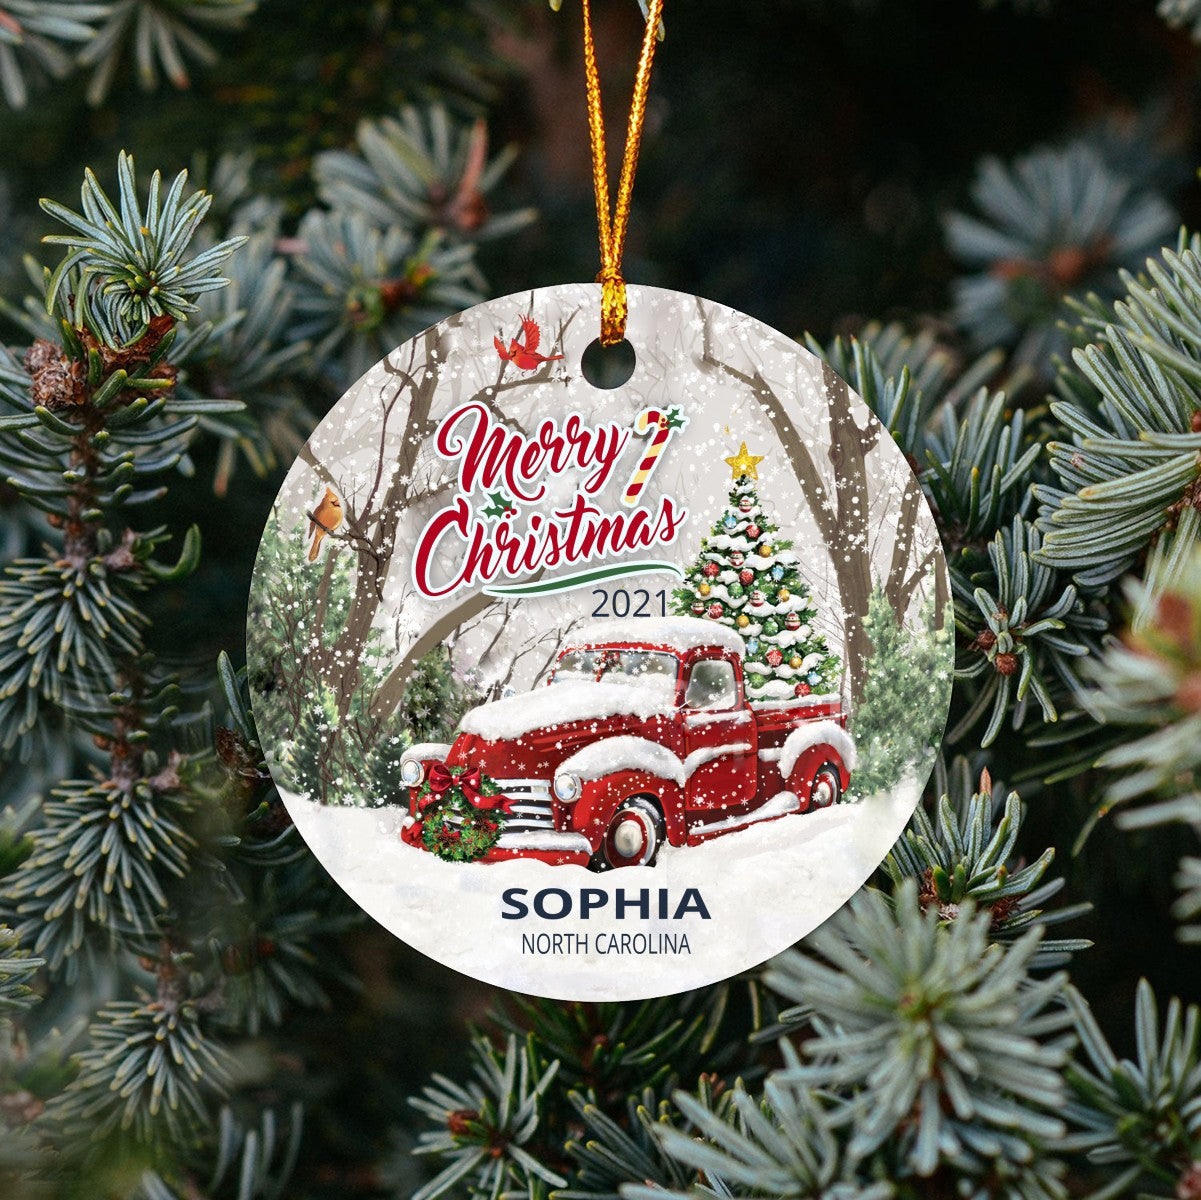 Christmas Tree Ornaments Sophia - Ornament With Name City, State Sophia North Carolina NC Ornament - Red Truck Xmas Ornaments 3'' Plastic Gift For Family, Friend And Housewarming